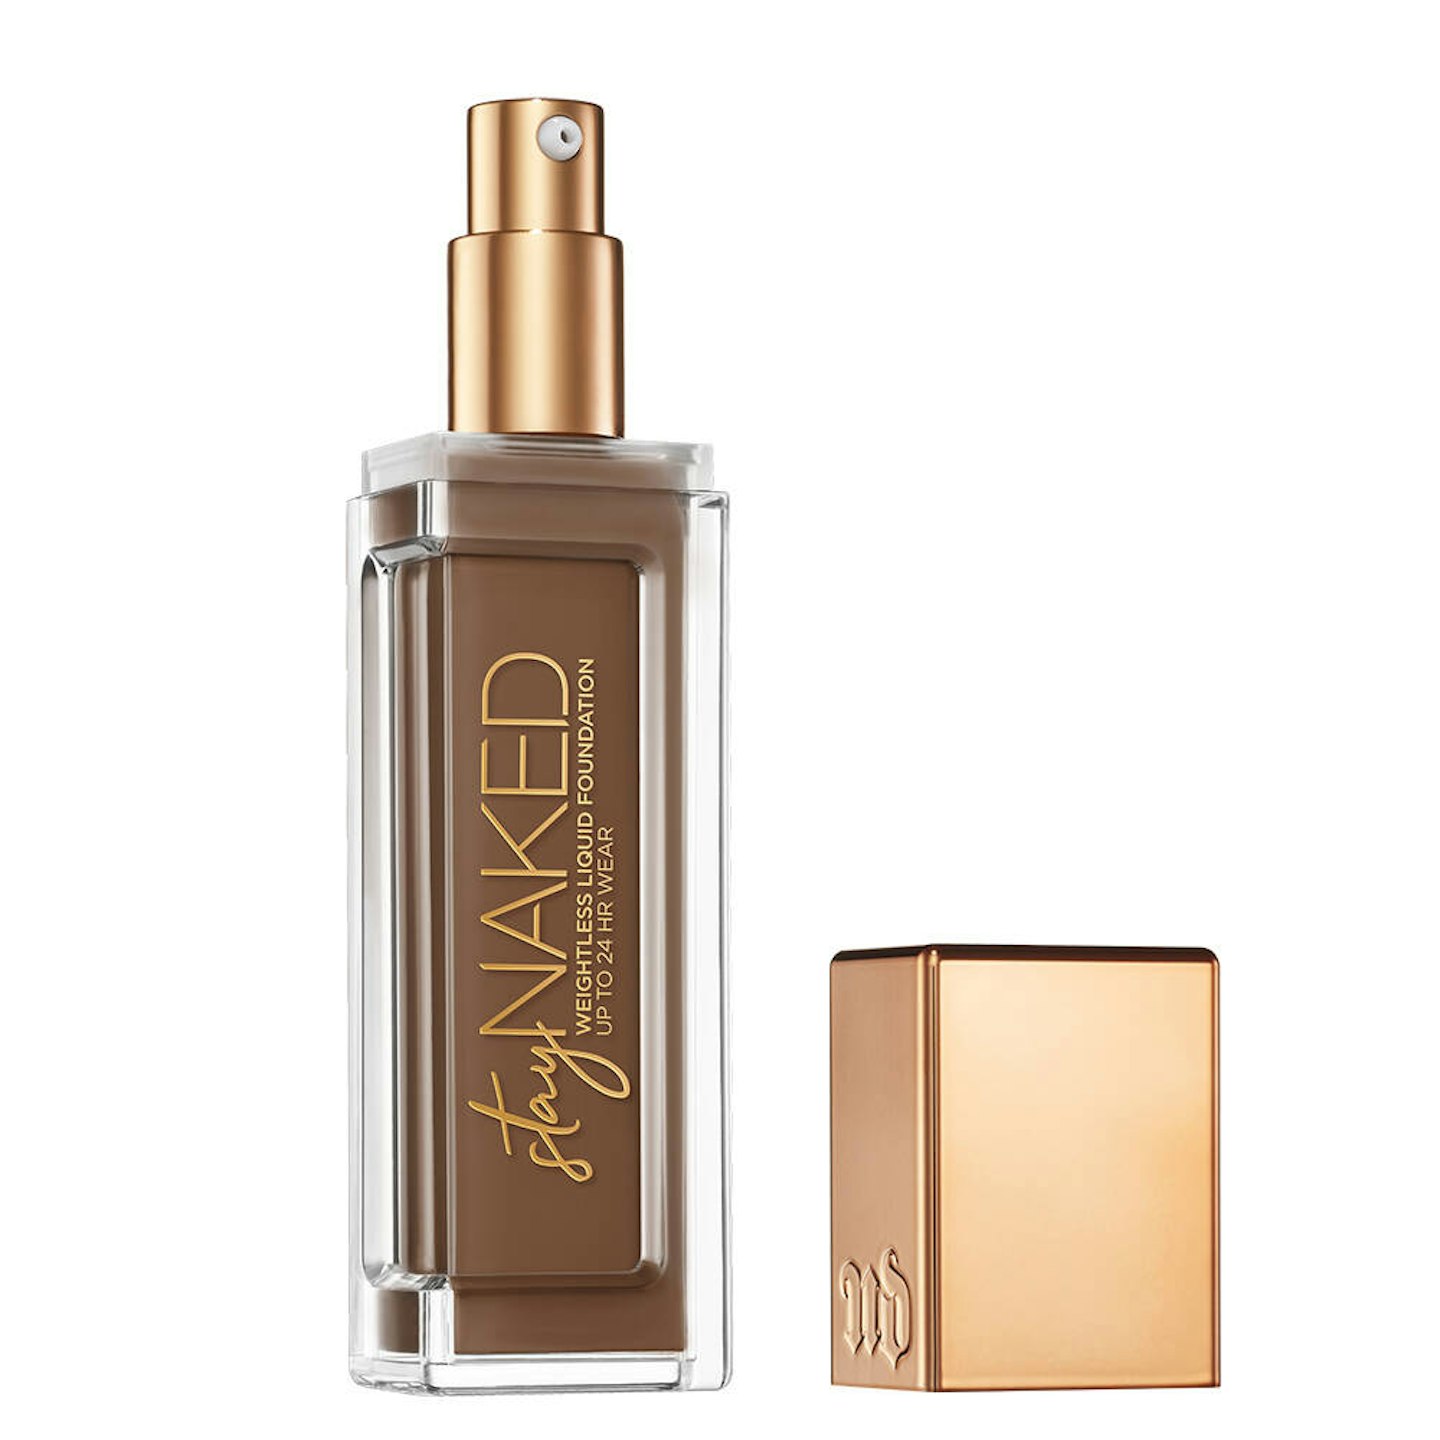 Urban Decay Stay Naked Foundation, £31